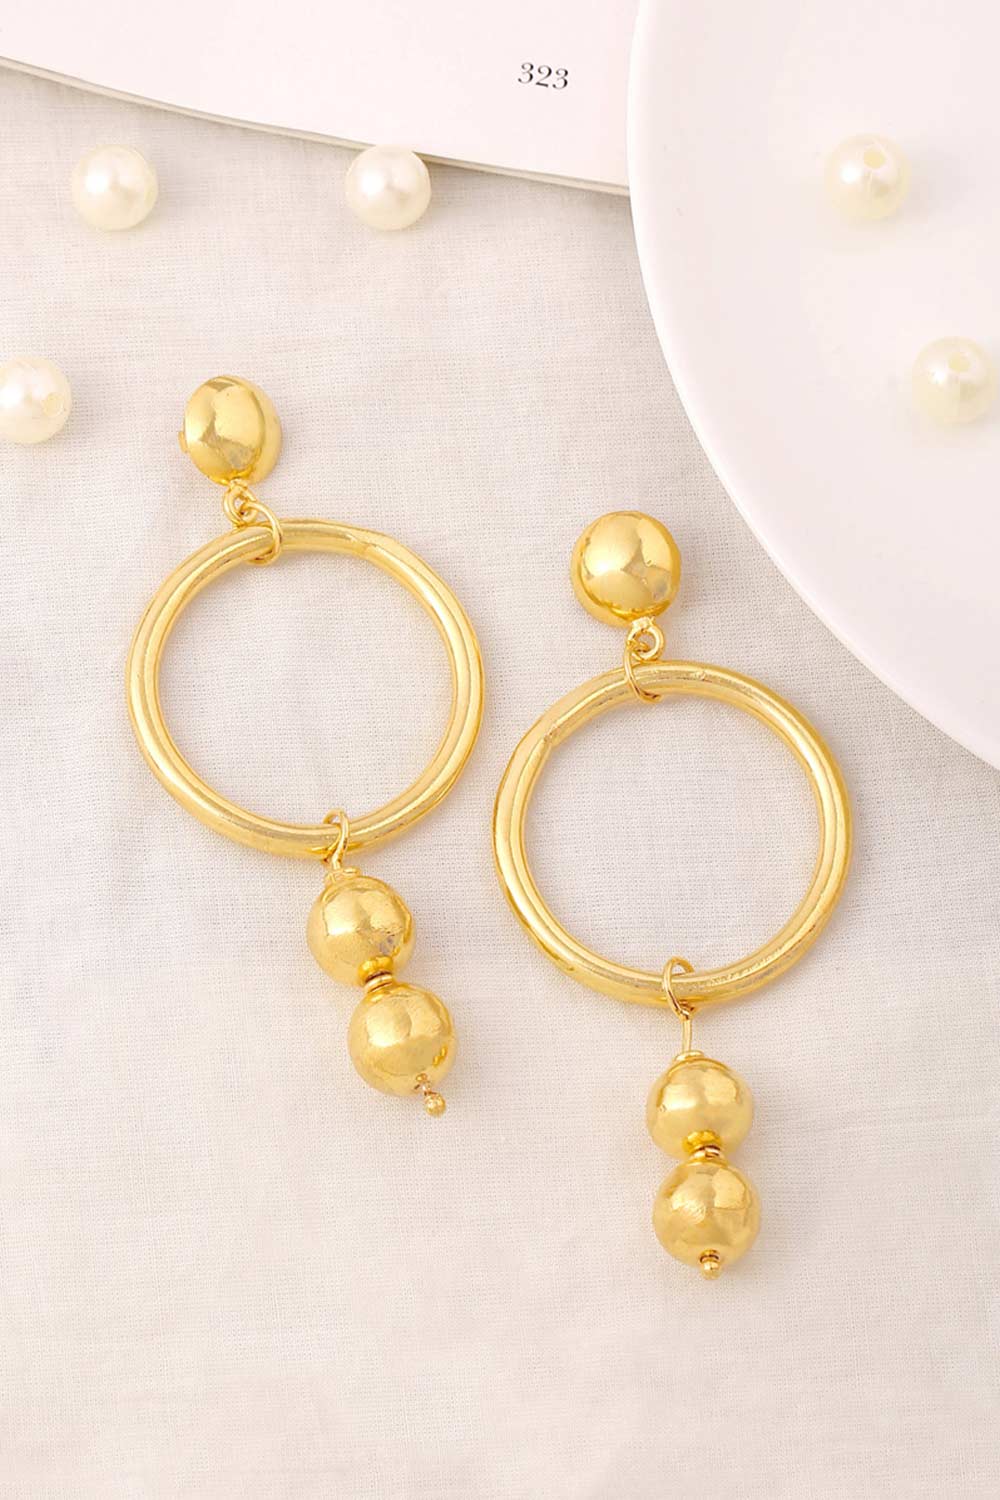 Buy Handcrafted Gold Classic Drop Earrings Online - Front